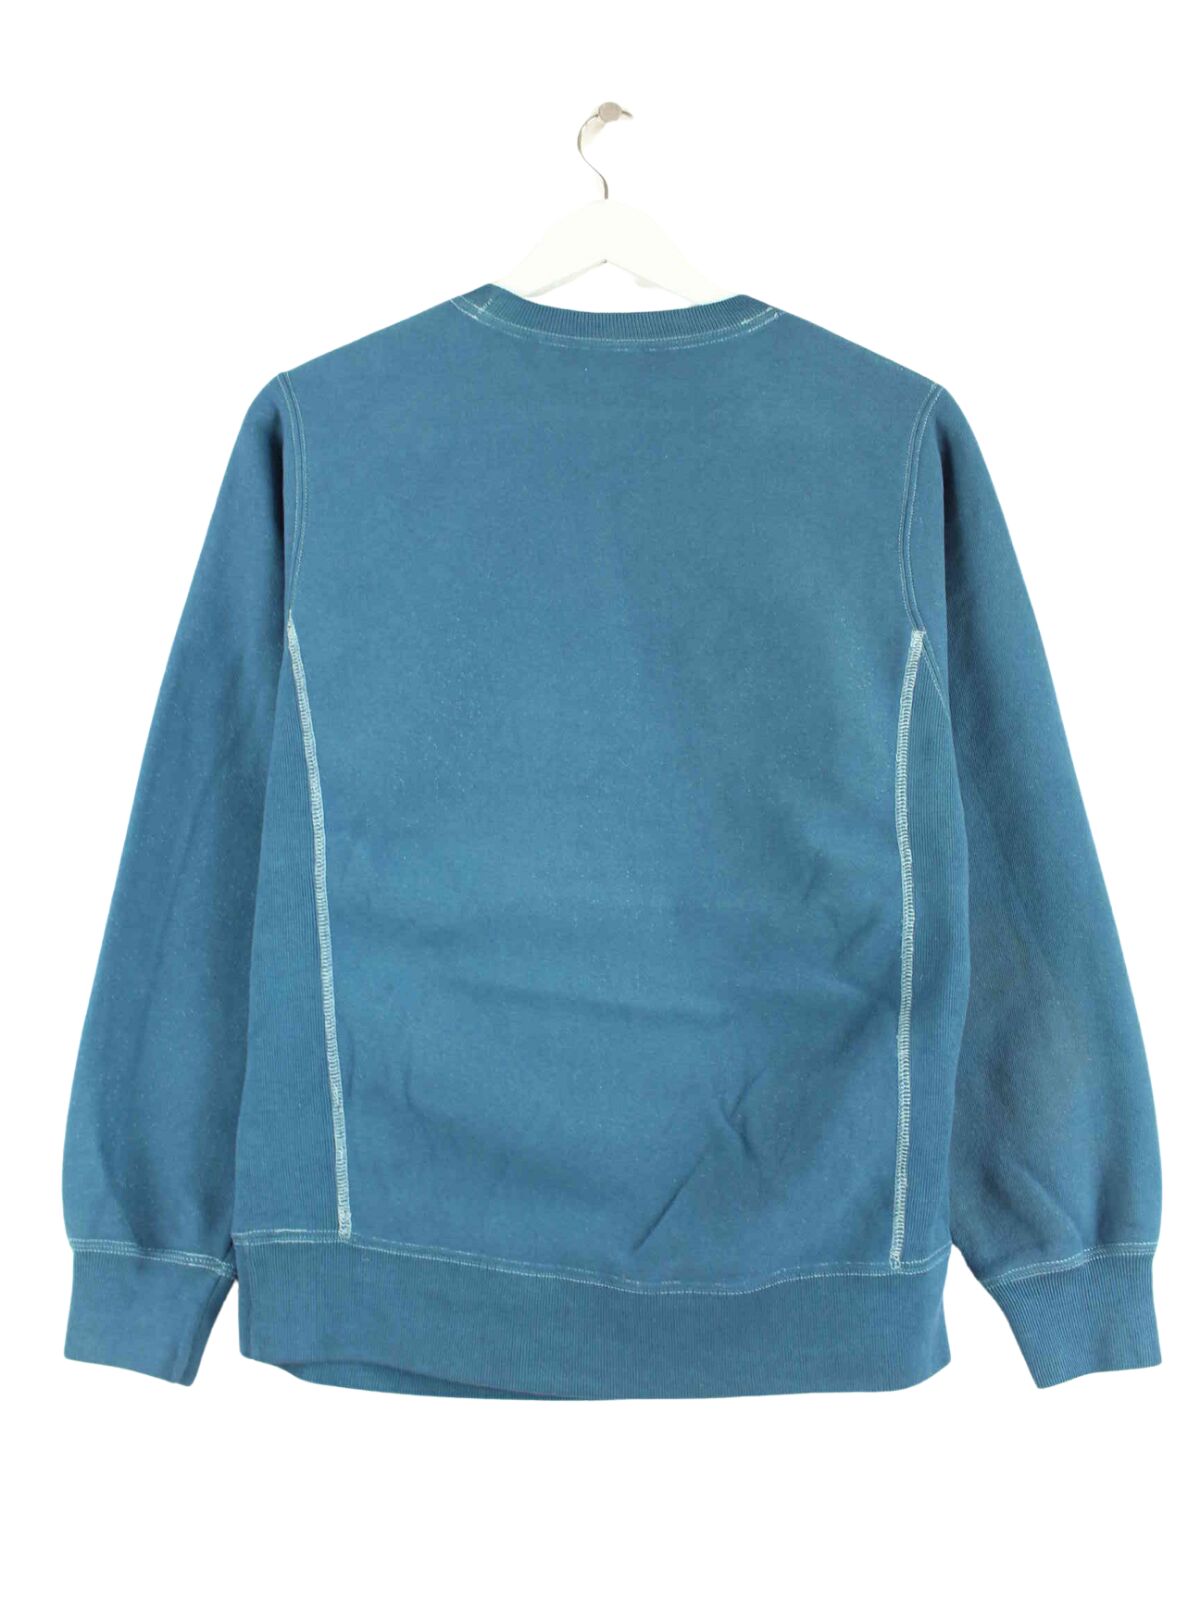 Champion Embroidered Reverse Weave Sweater Blau S (back image)